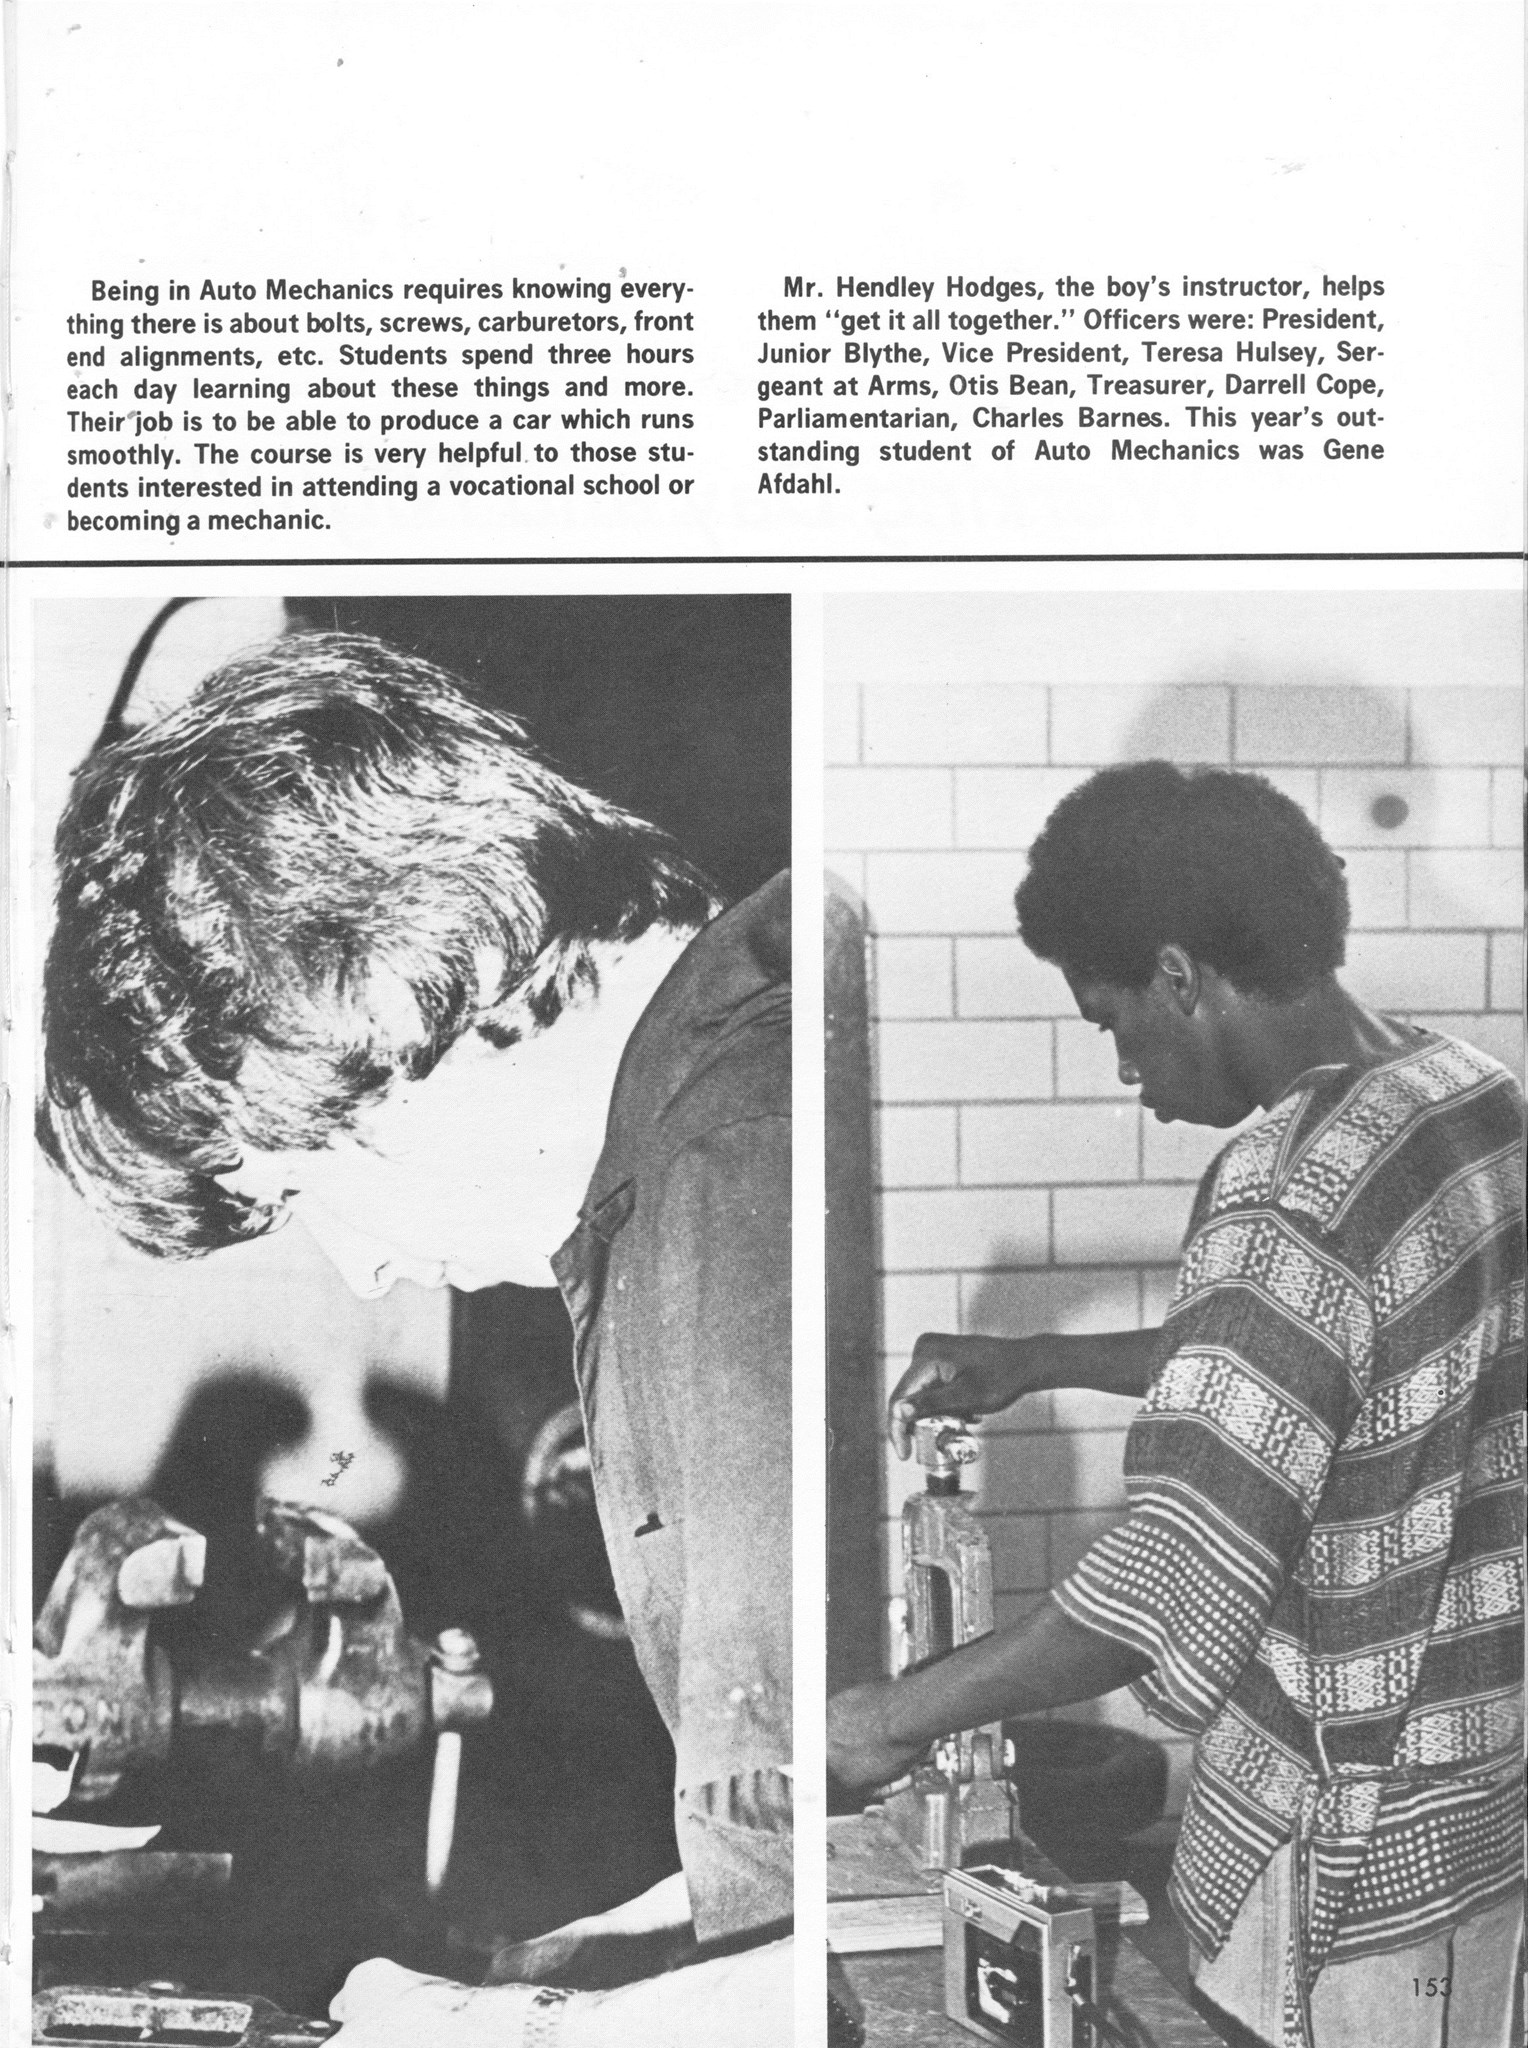 ../../../Images/Large/1980/Arclight-1980-pg0153.jpg